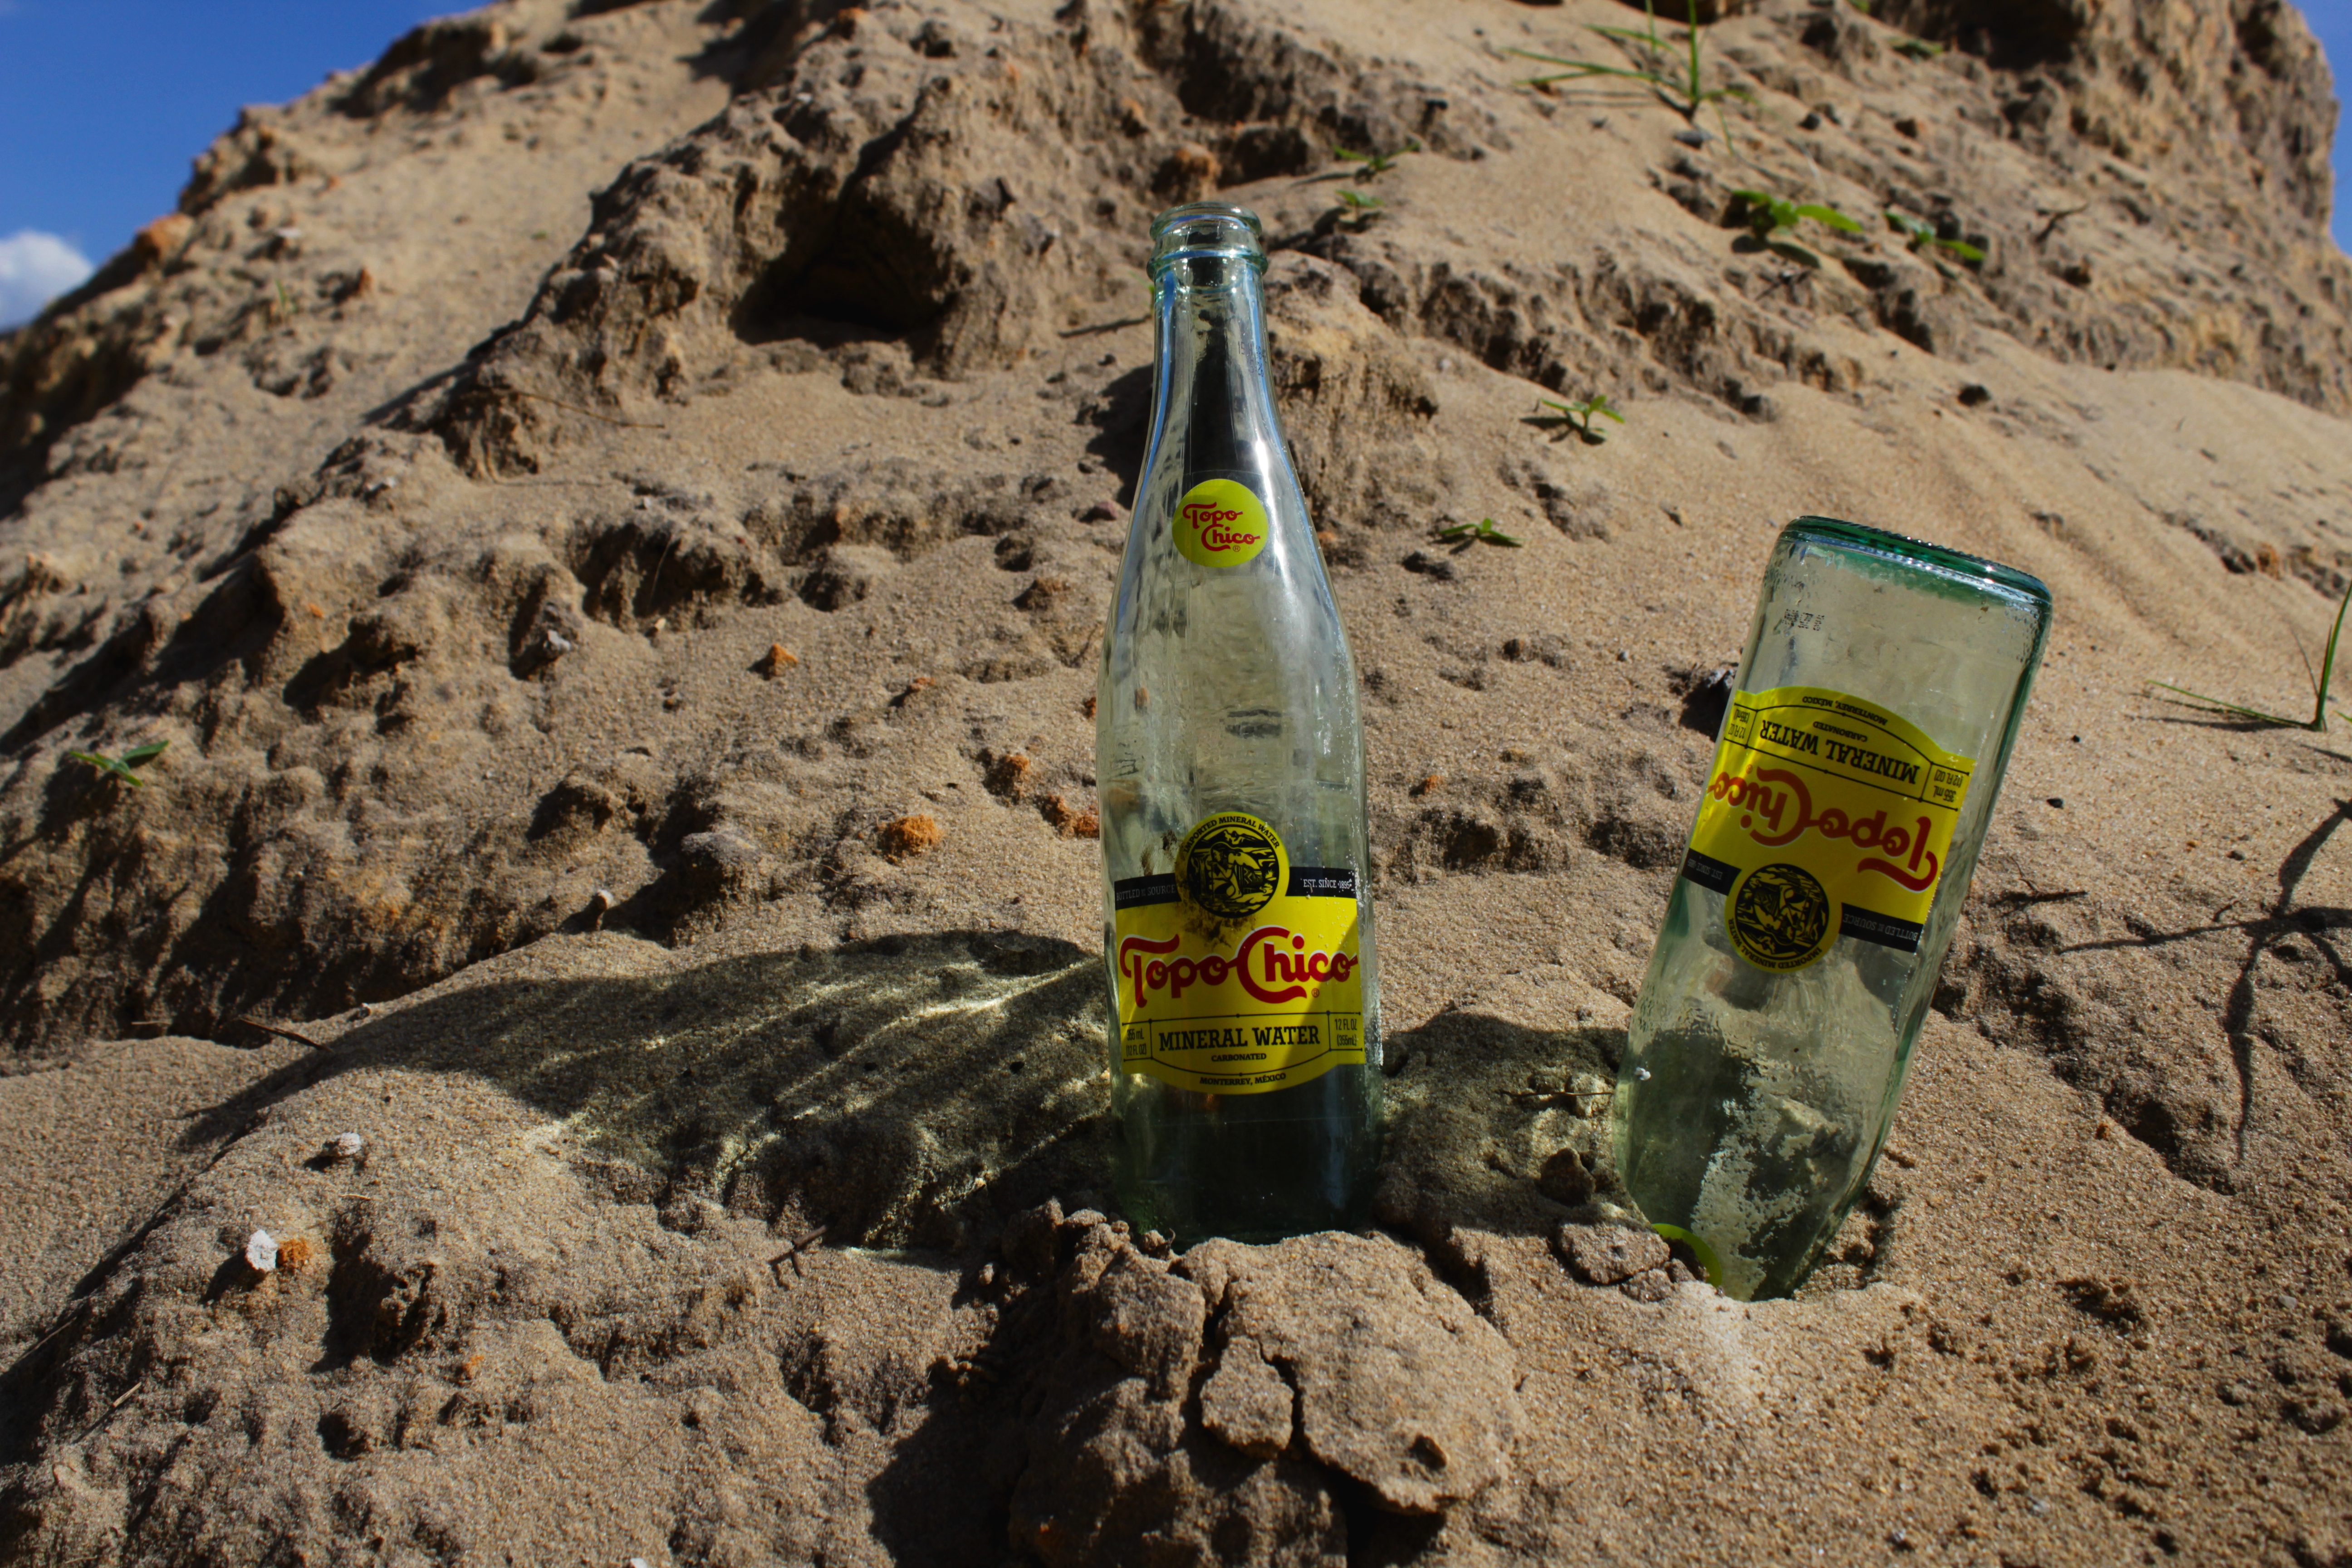 Coke and Coors Partner for Topo Chico Hard Seltzer, Alcohol Industry Market Research Bubbles Up